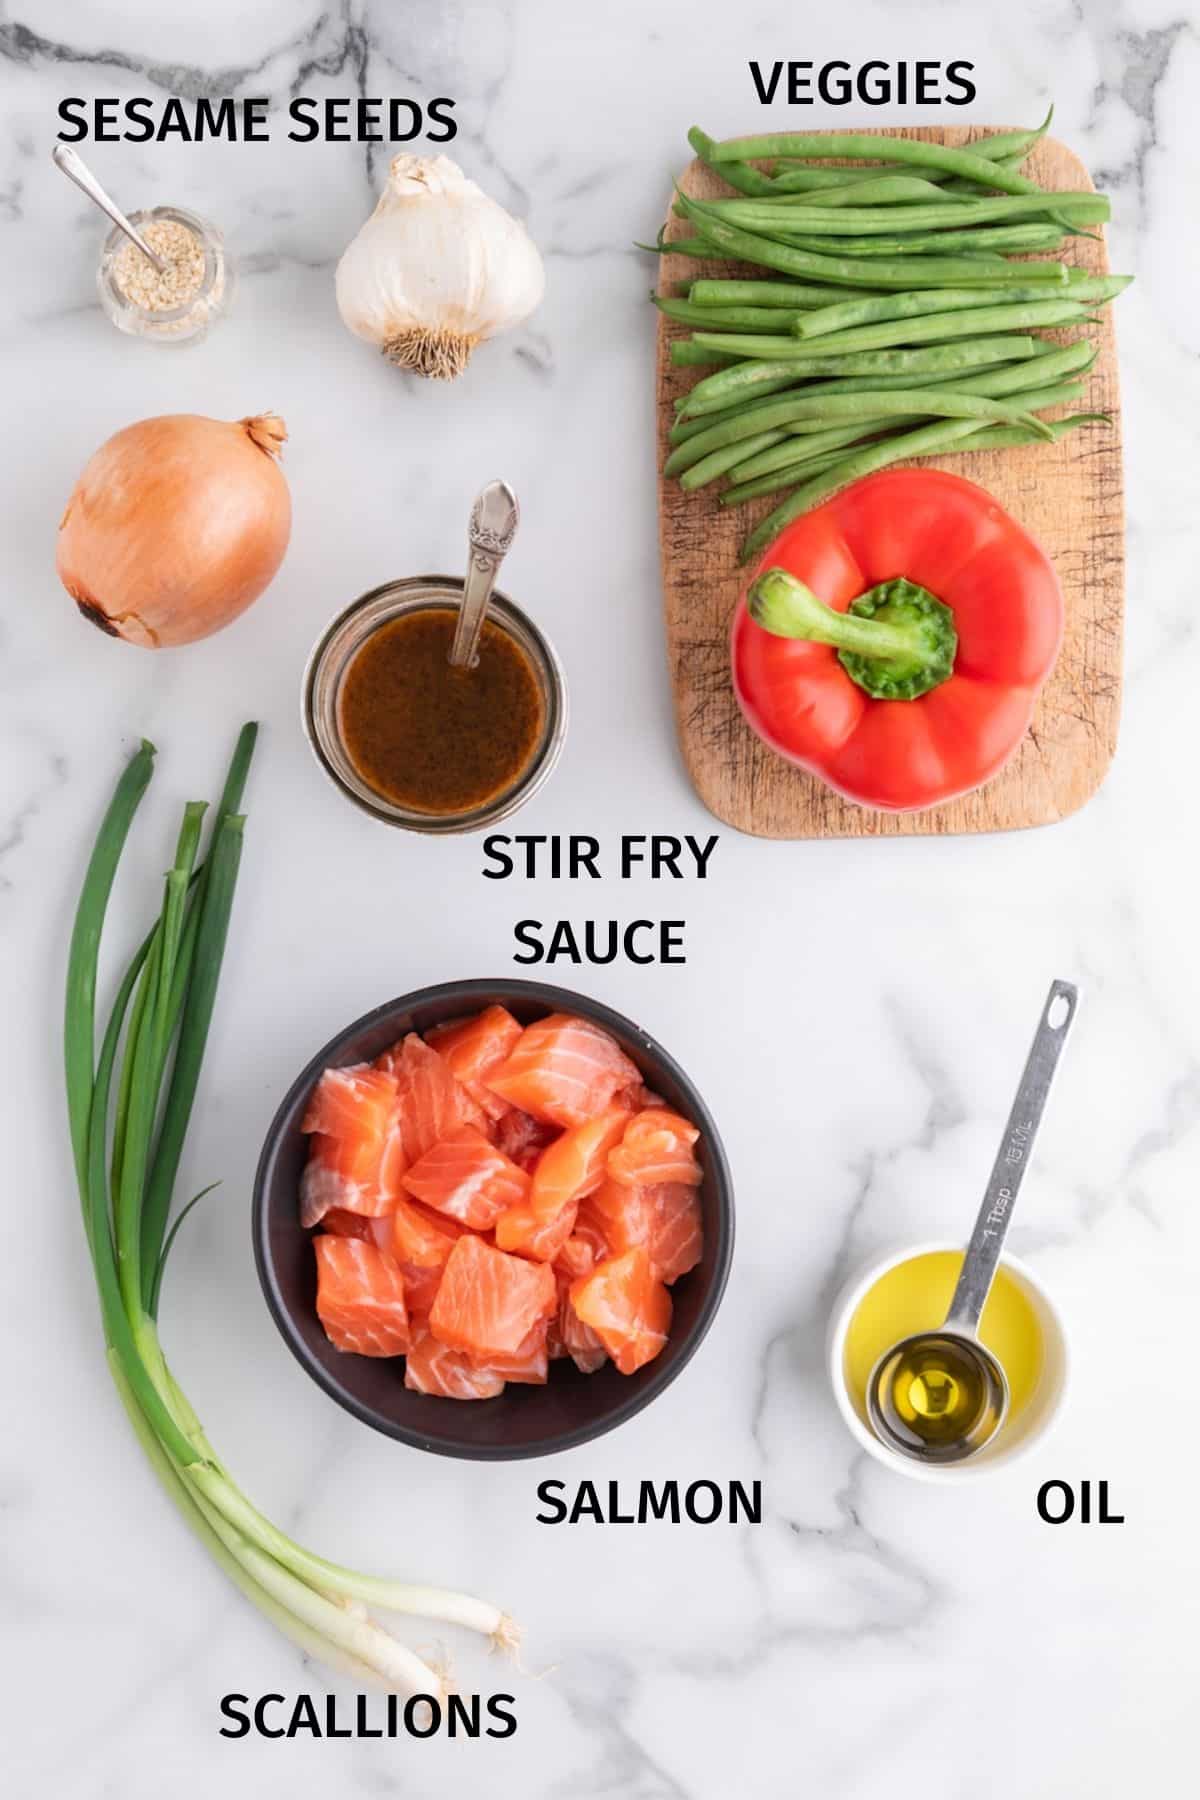 Salmon stir fry ingredients set out on a white marble surfce.